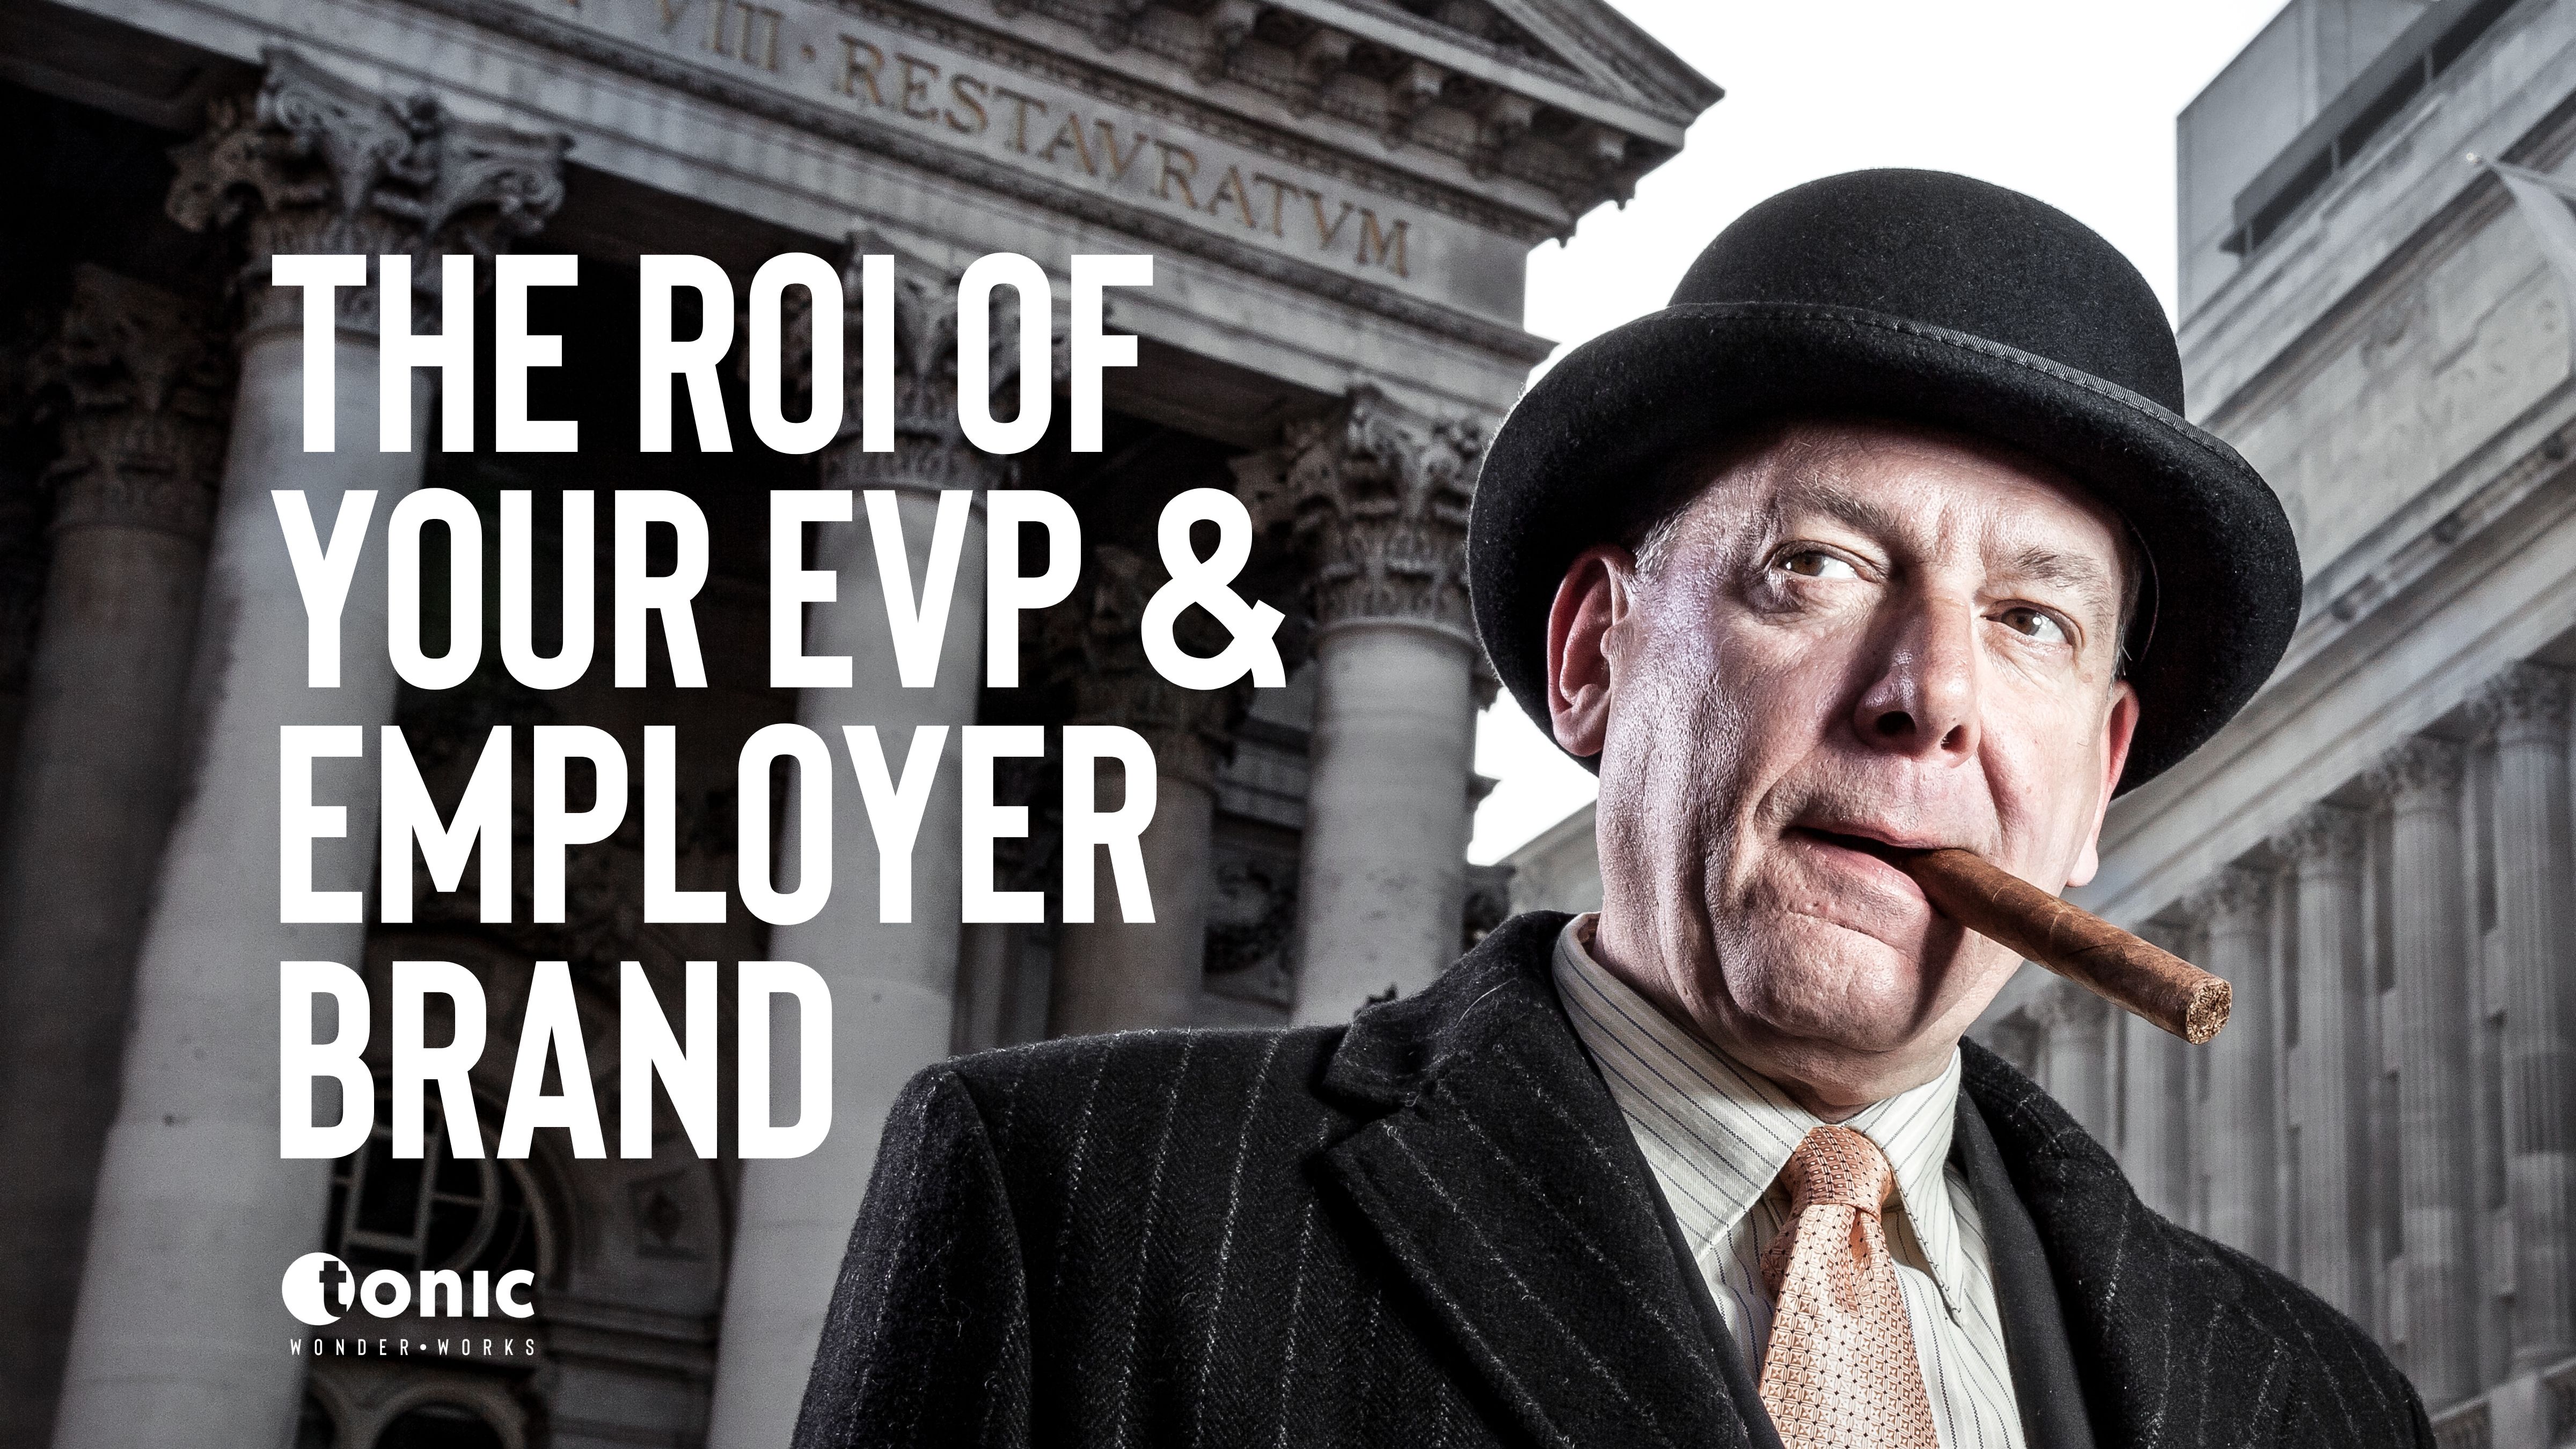 The ROI of your EVP & Employer Brand